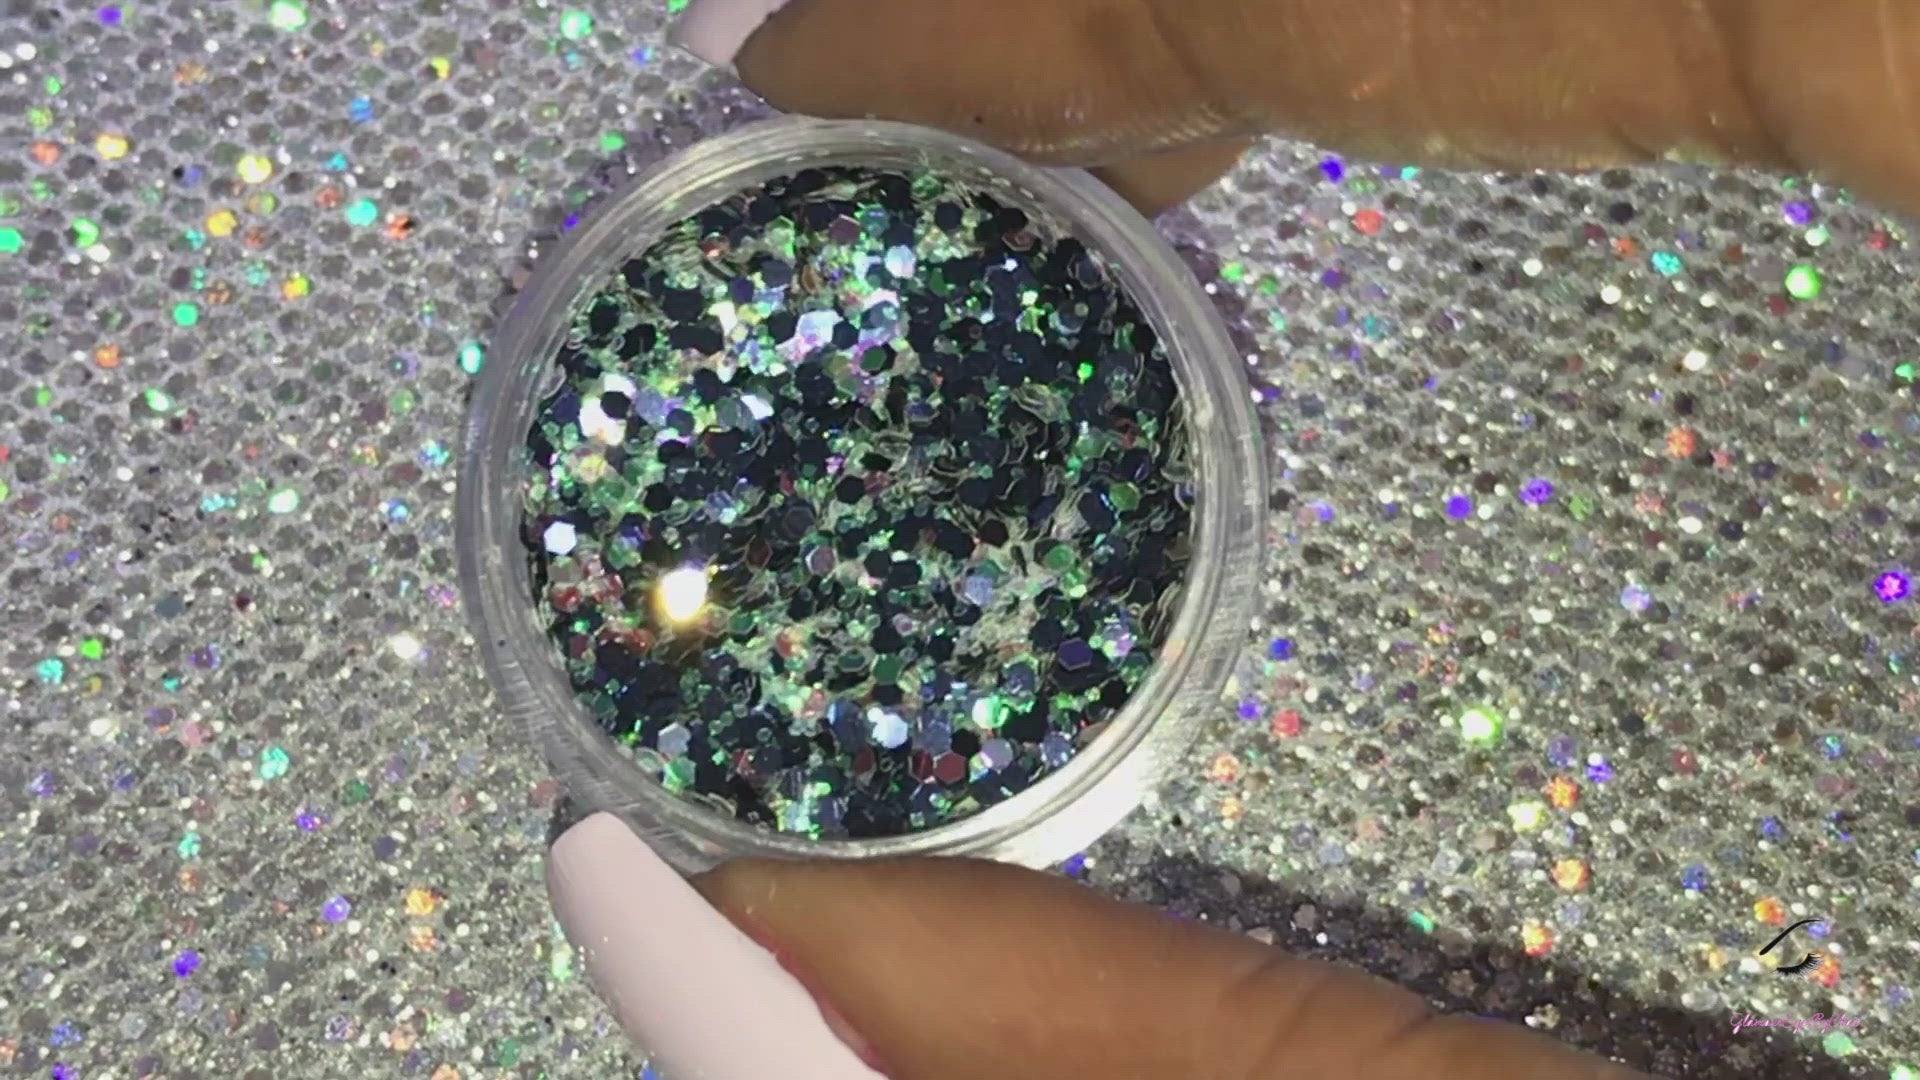 This glitter is called Mermaid Delight and is part of the chunky glitter collection.  It consists of navy blue glitter with a white iridescent sparkle. Mermaid Delight can be used for your face, body, hair and nails.  Comes in 5g jars only. ﻿**Glitter will be discontinued once sold out**